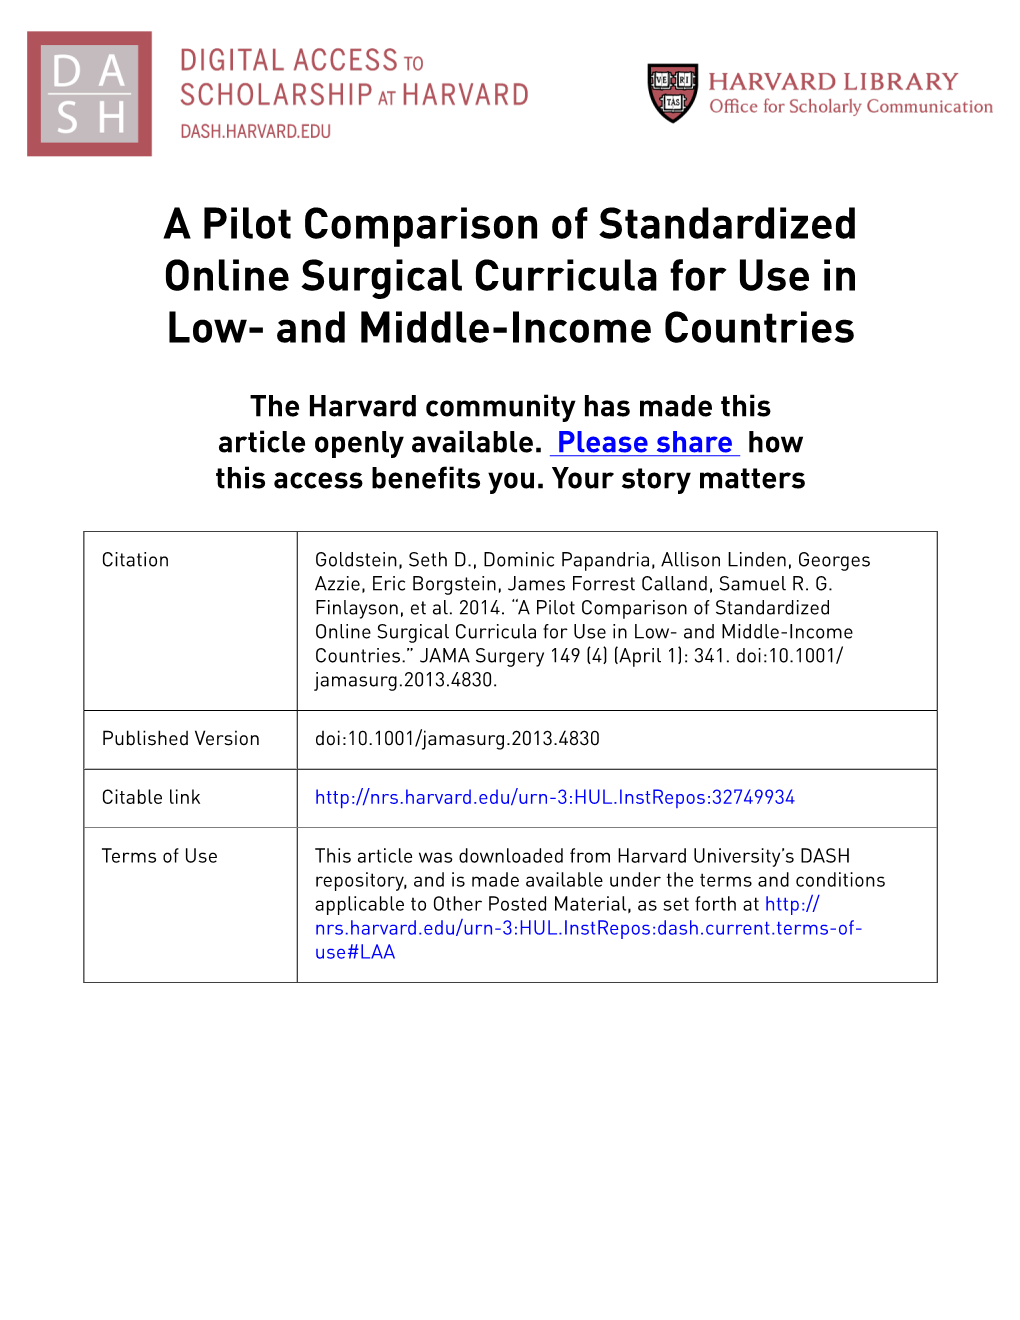 A Pilot Comparison of Standardized Online Surgical Curricula for Use in Low- and Middle-Income Countries